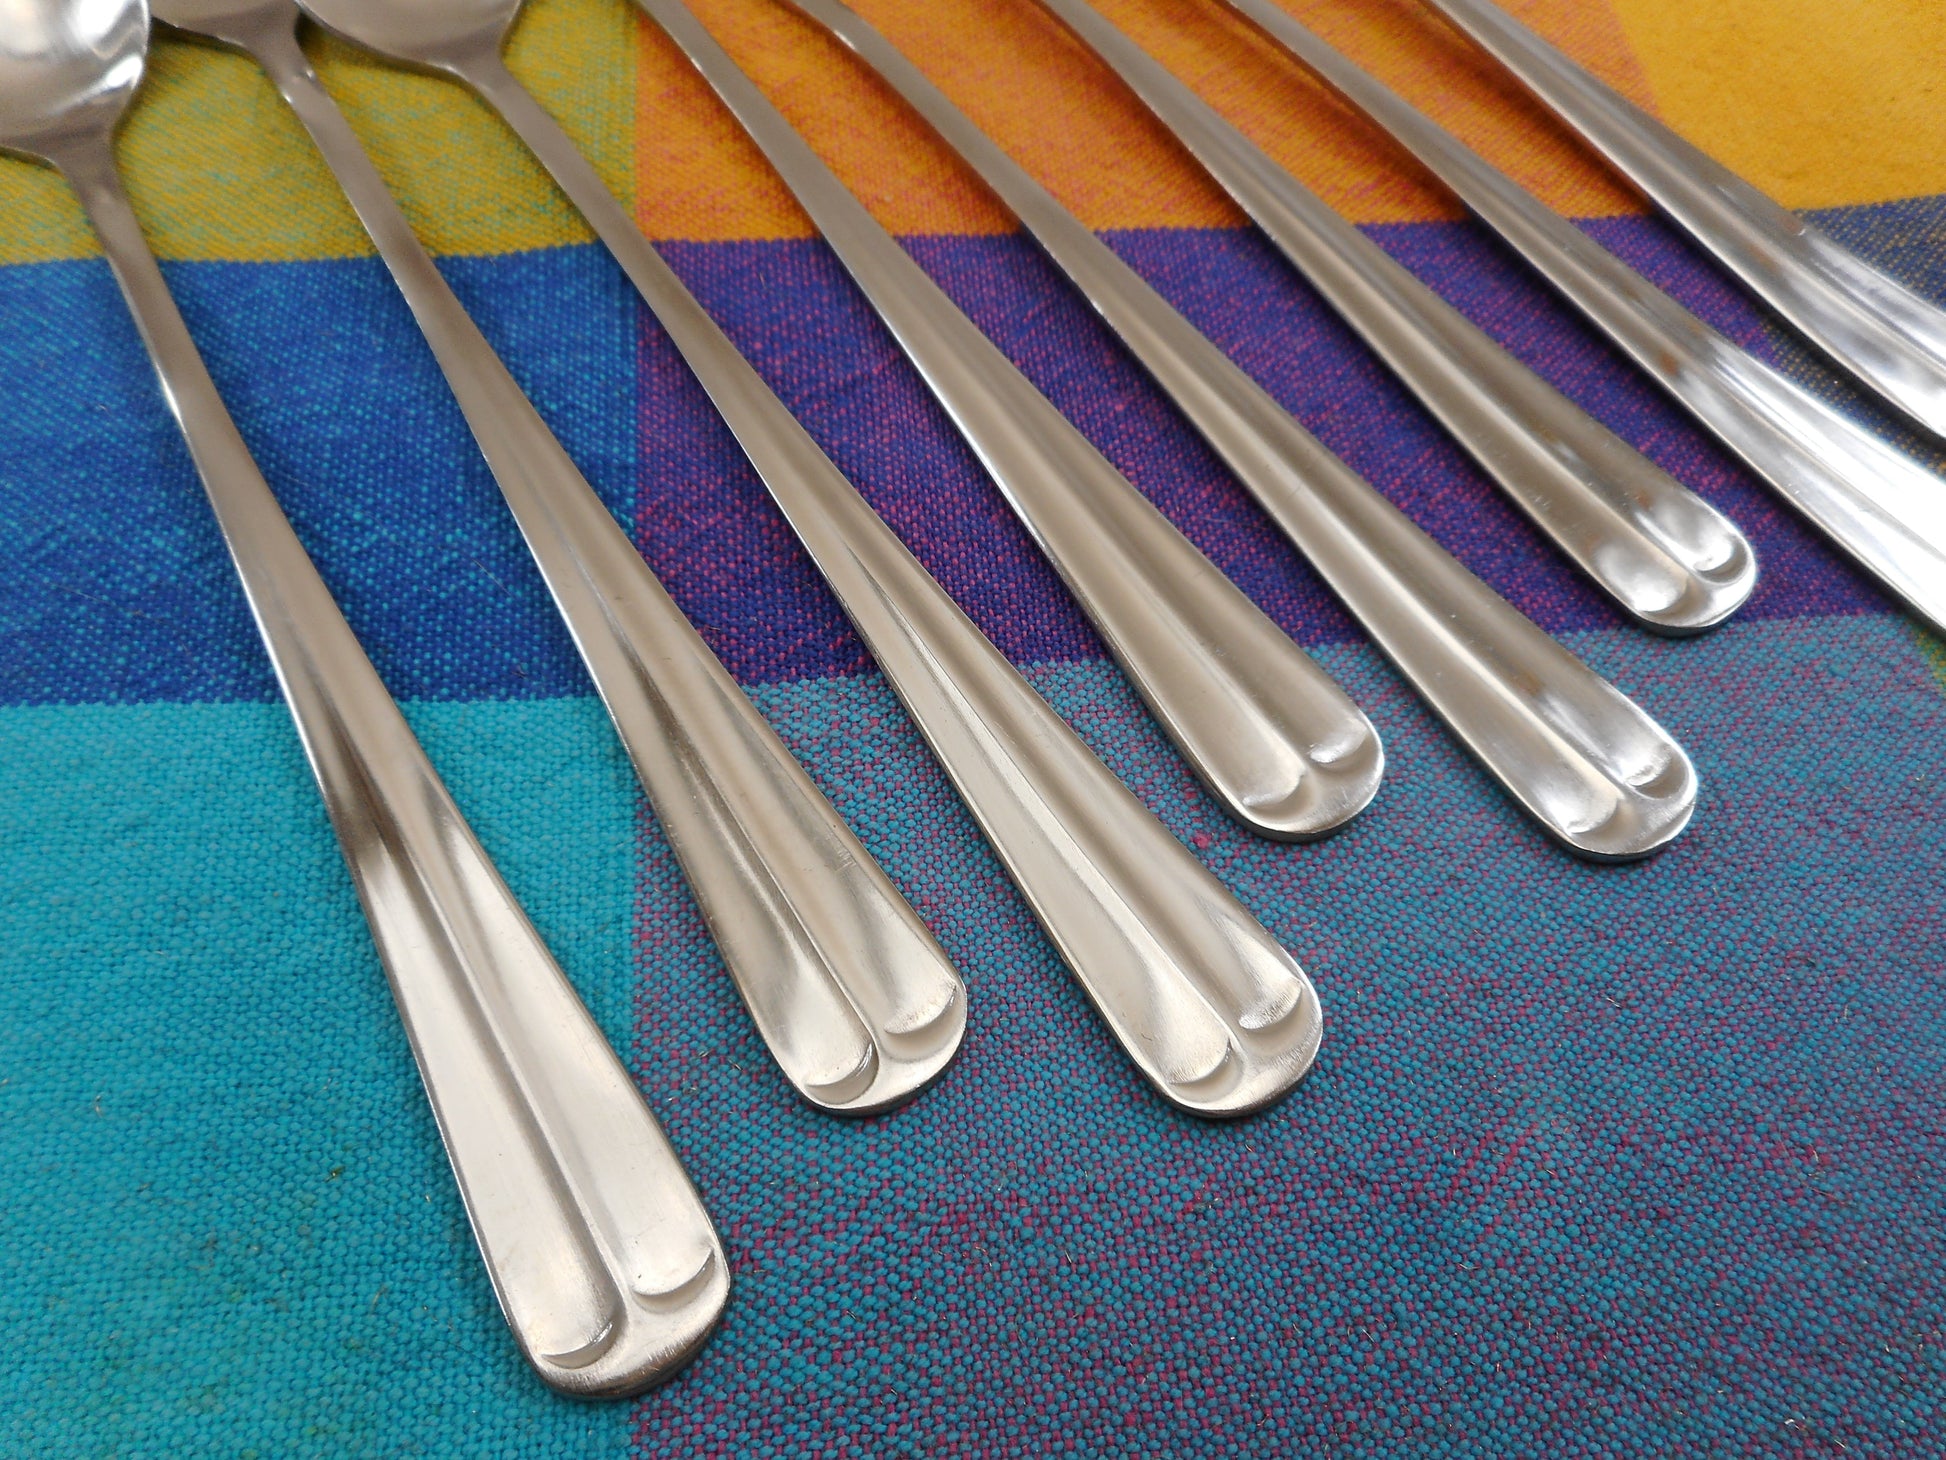 International Silver Gran Royal China Stainless Flatware - 8 Set Iced Tea Spoons Used